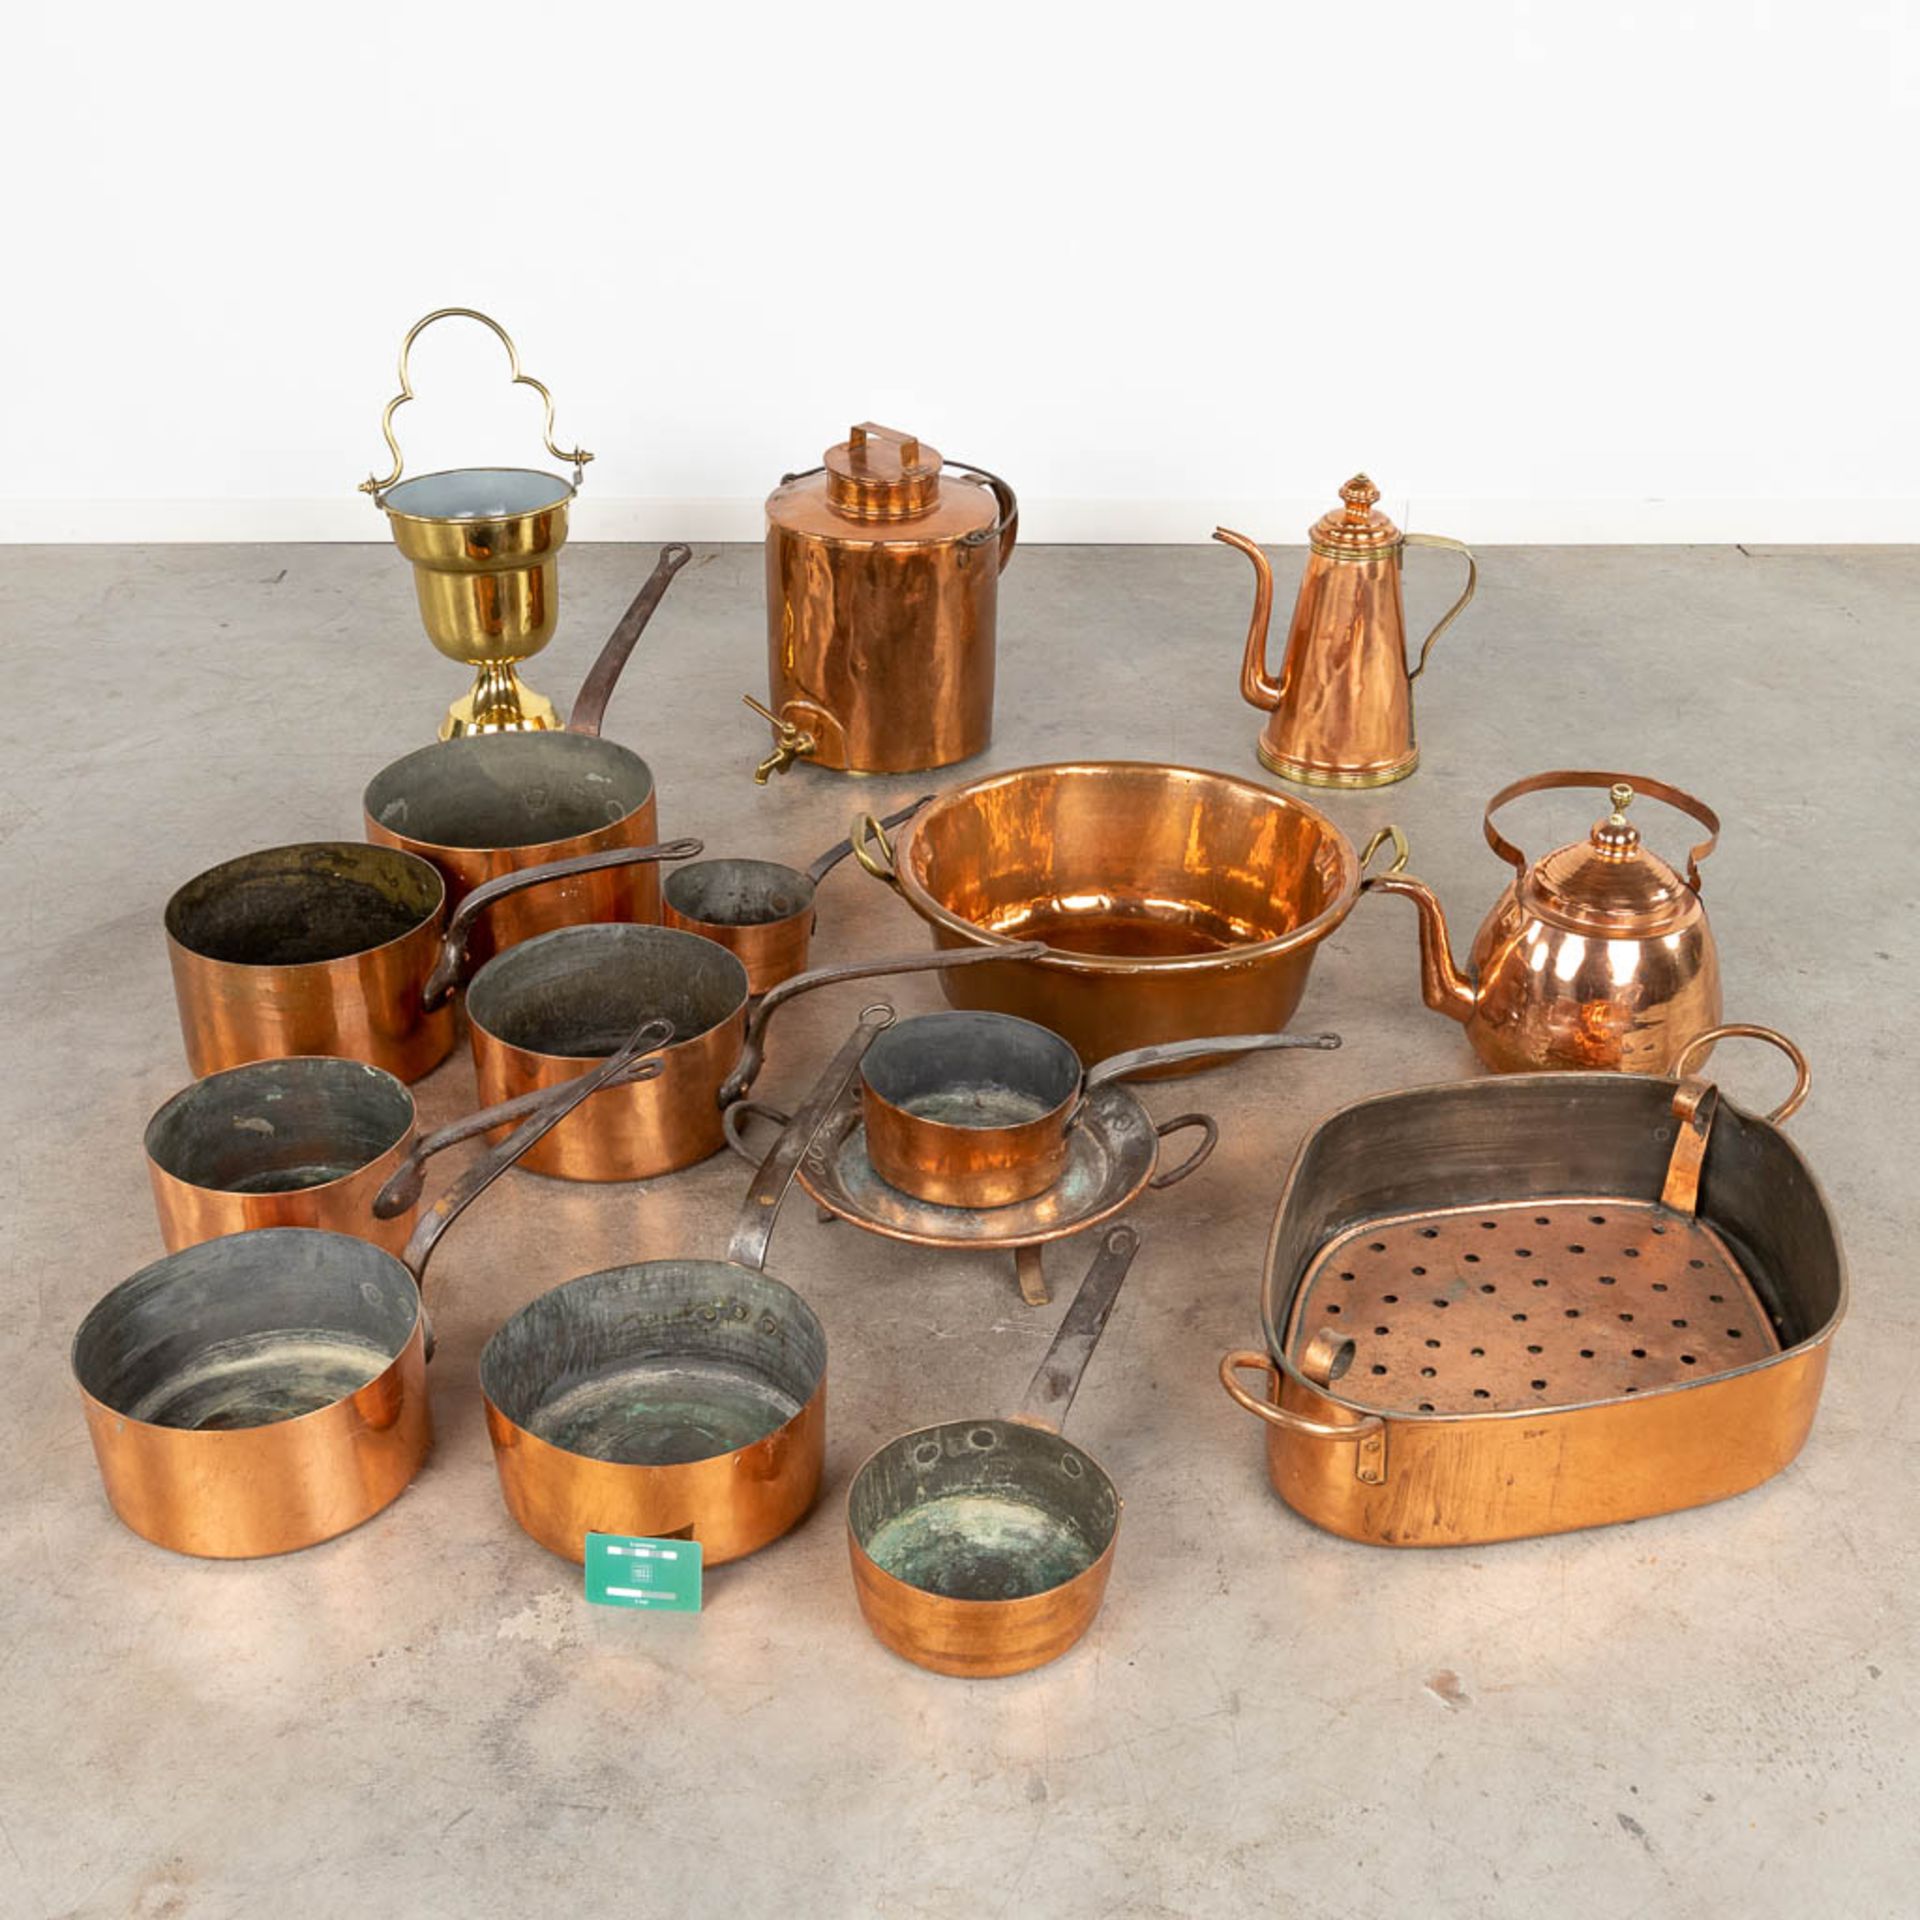 A collection of copper accessories and kitchen utensils. (W:47 x H:40 x D:35 cm) - Image 2 of 11